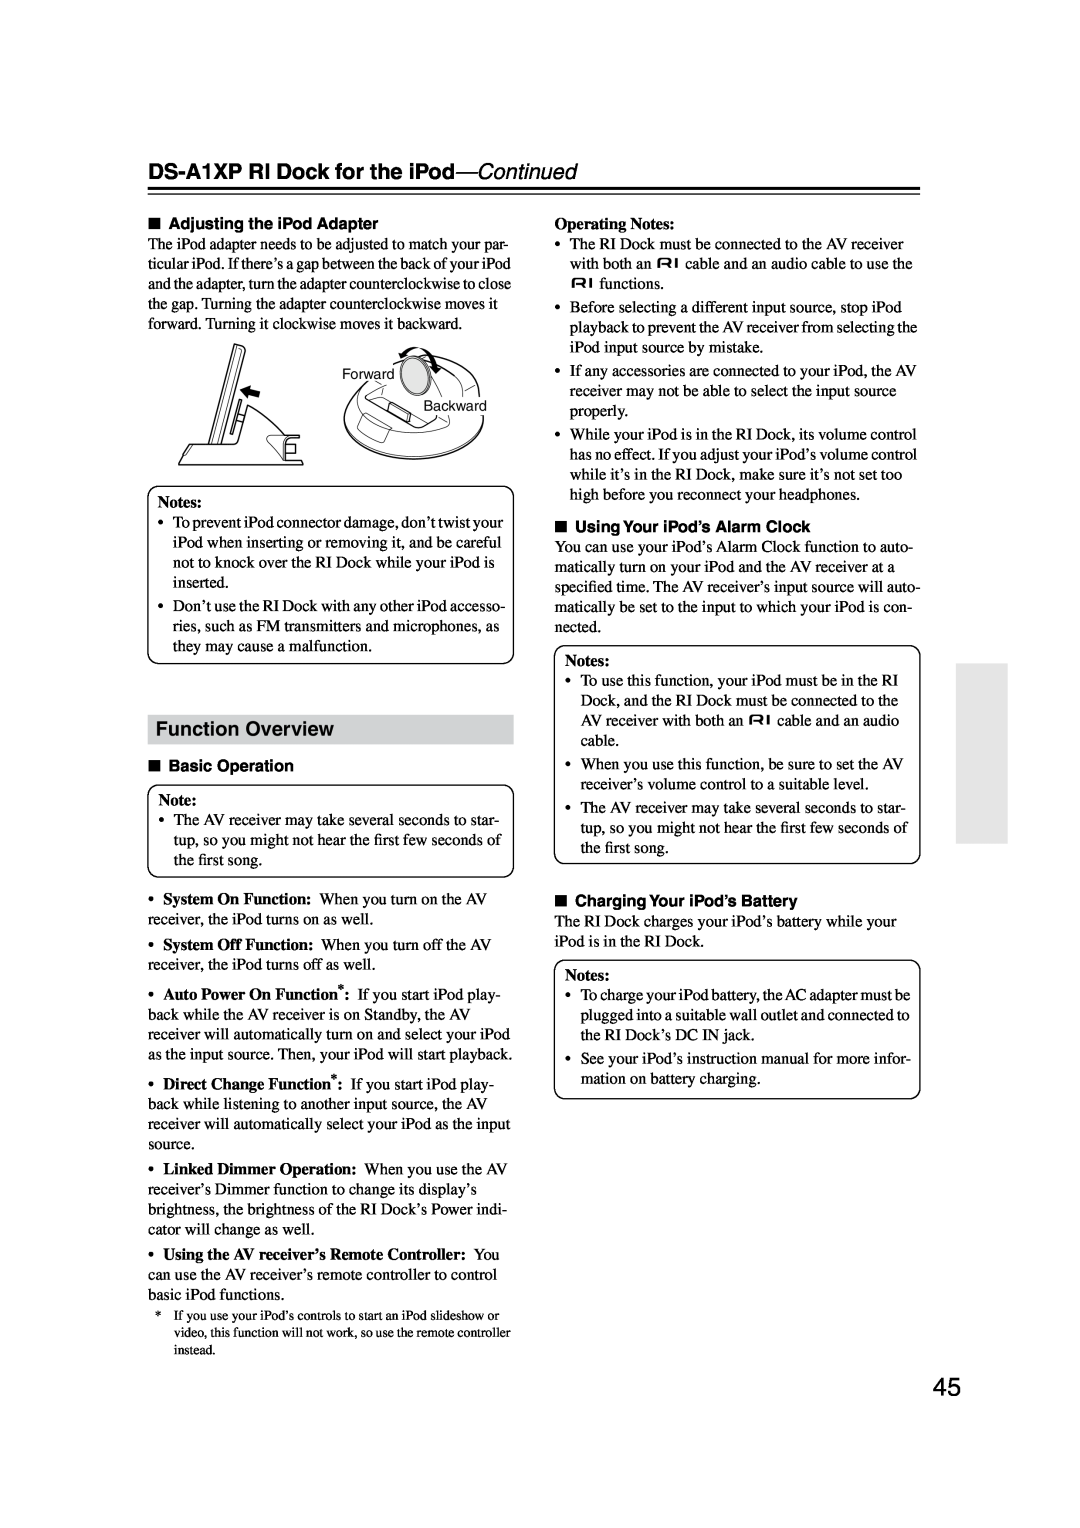 Onkyo HT-S4100 instruction manual DS-A1XPRI Dock for the iPod-Continued, Operating Notes 